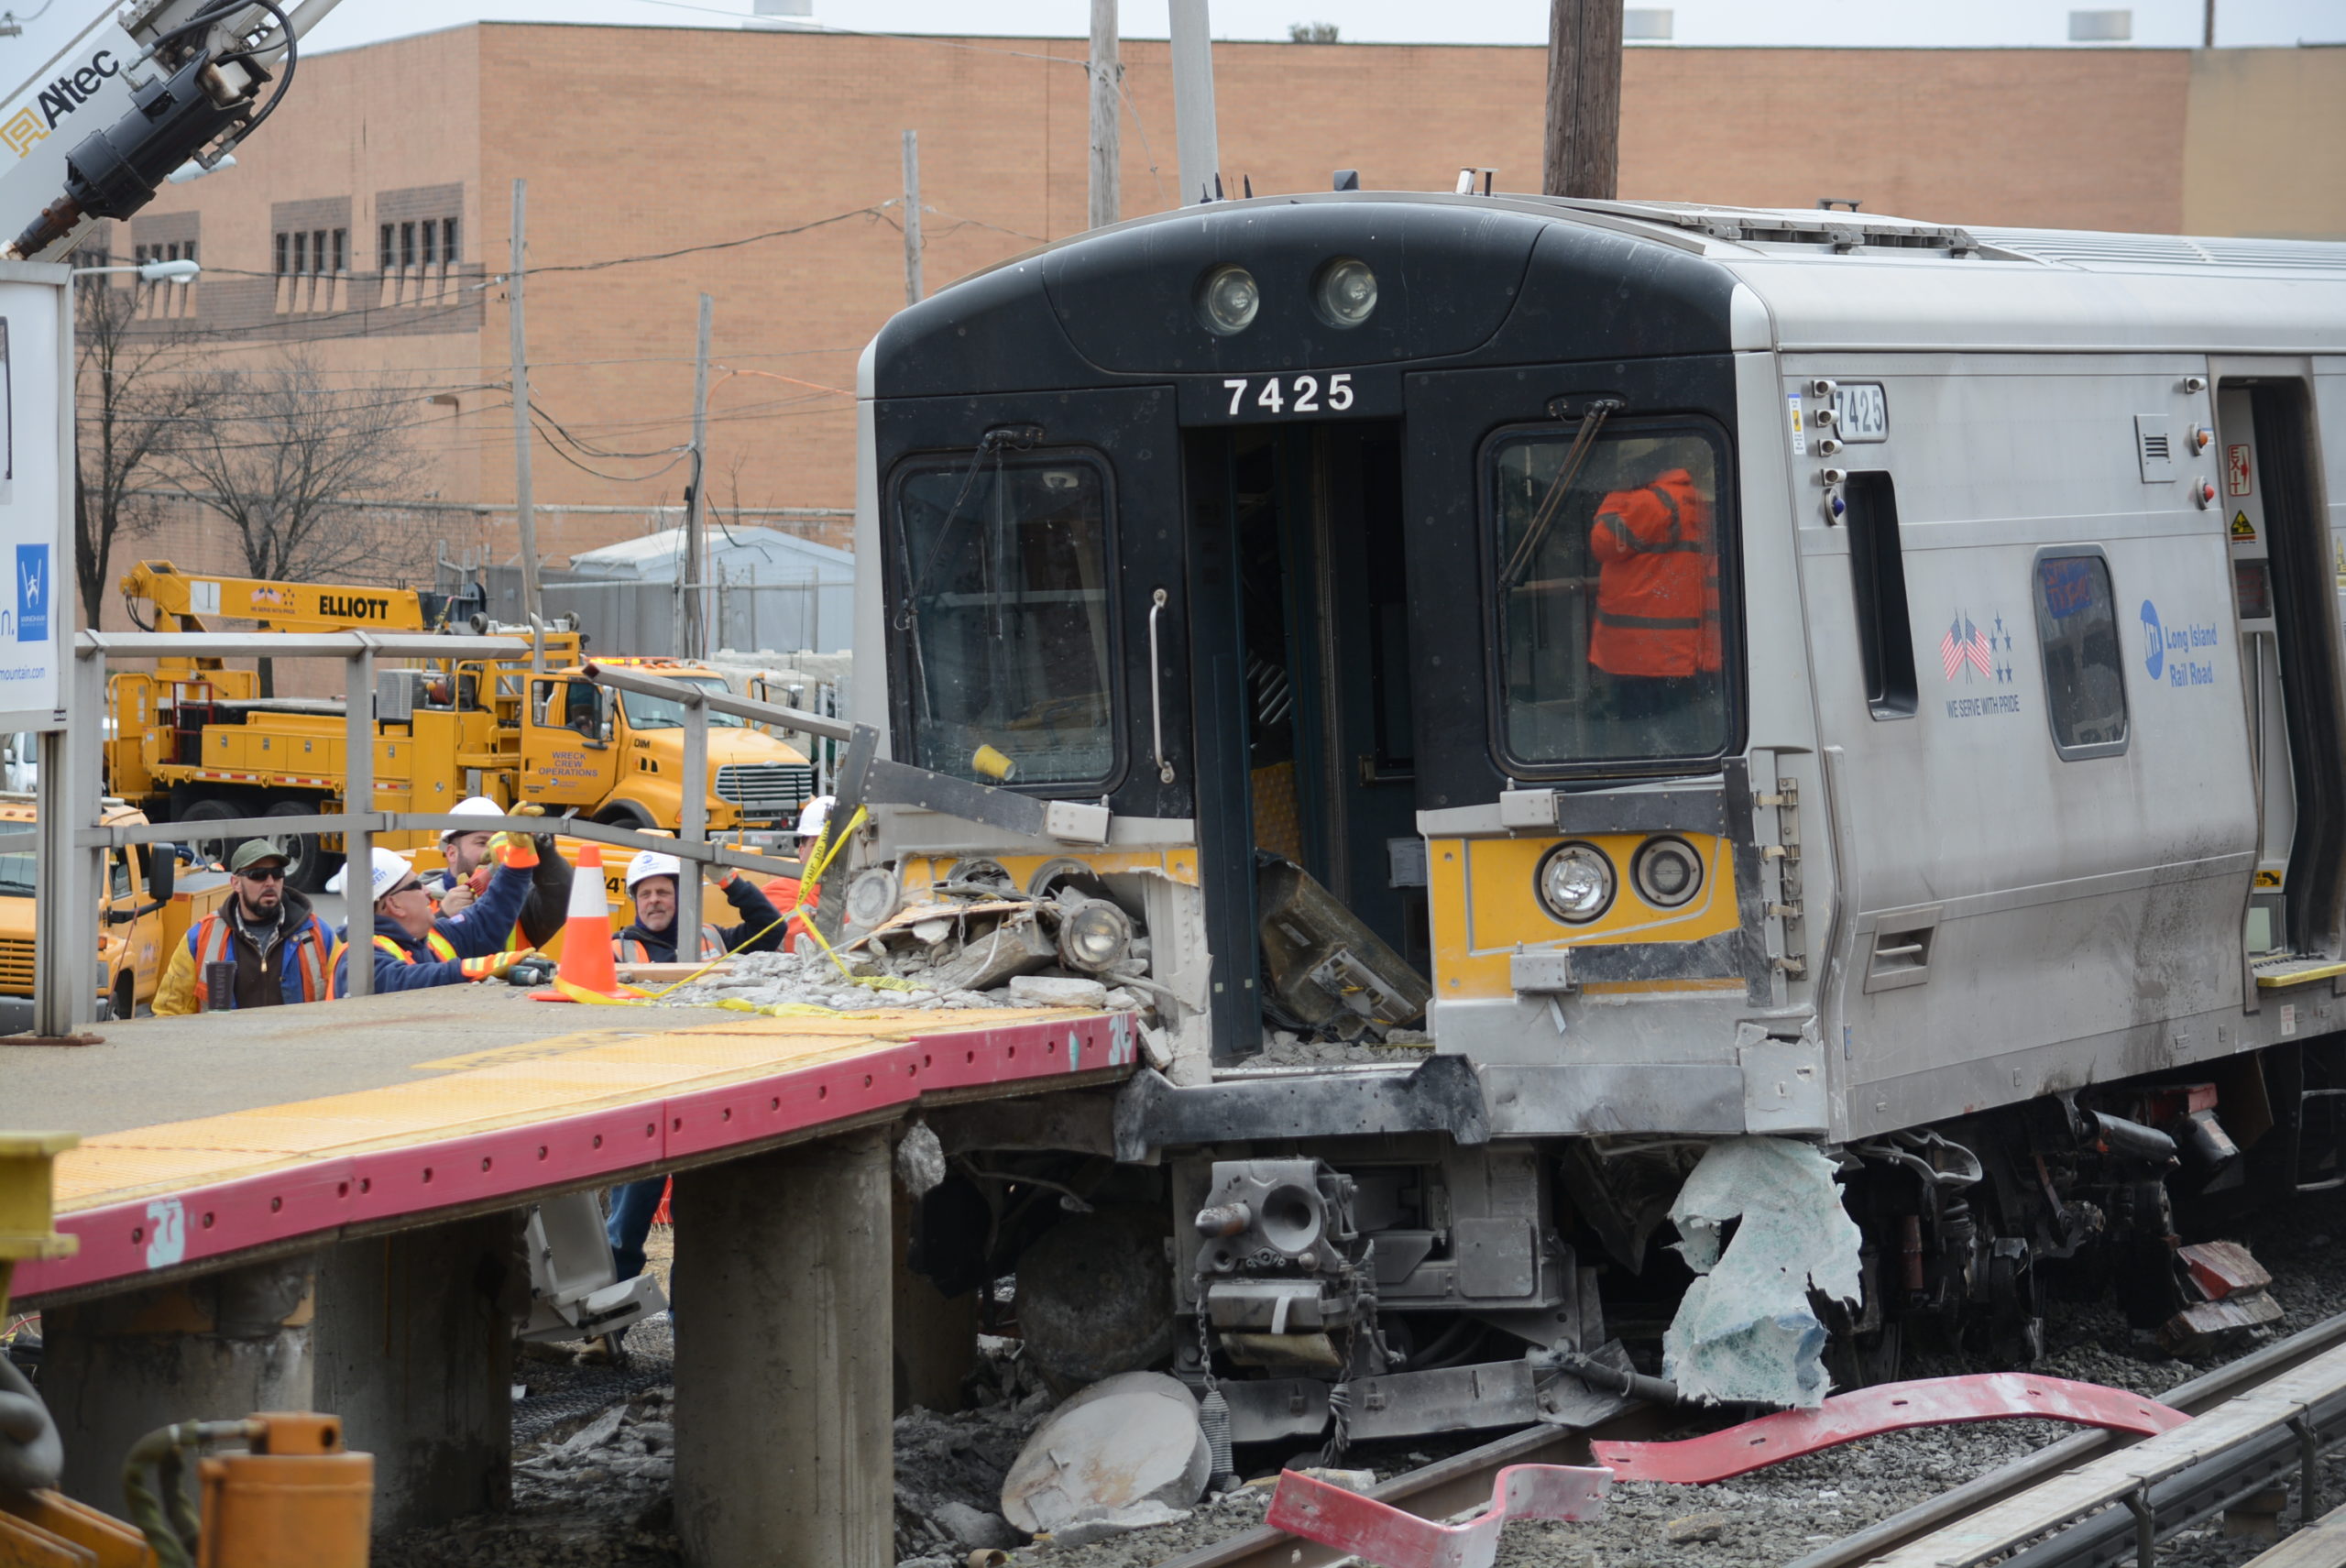 Three people were killed in a fatal crash before this LIRR train derailed and collided with the Westbury train station platform. (Photo by Janelle Clausen)